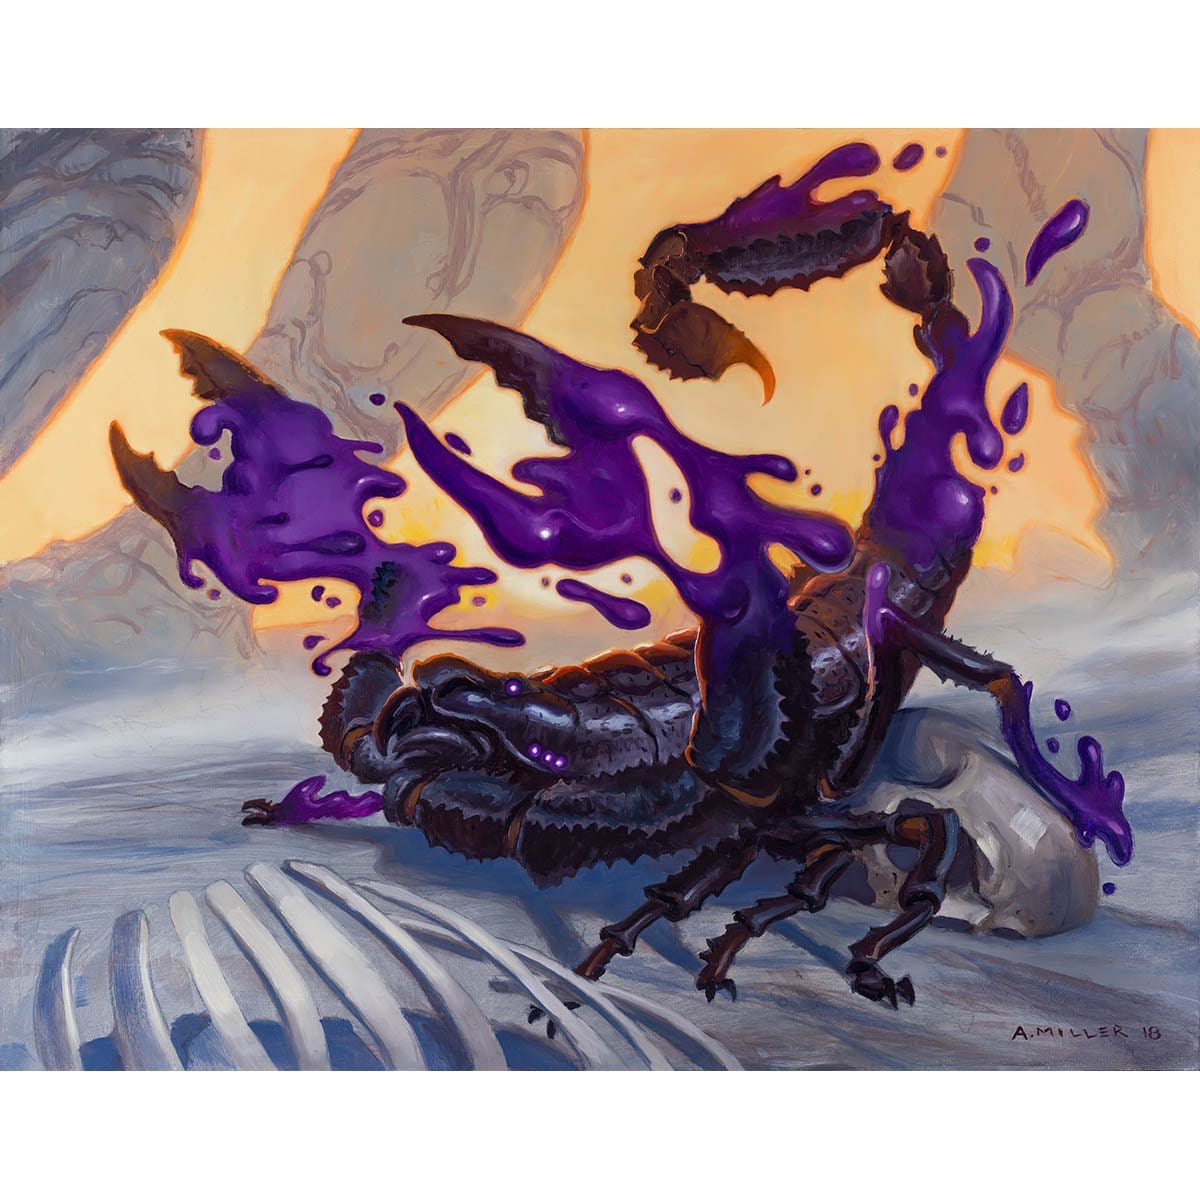 Venomous Changeling Print - Print - Original Magic Art - Accessories for Magic the Gathering and other card games